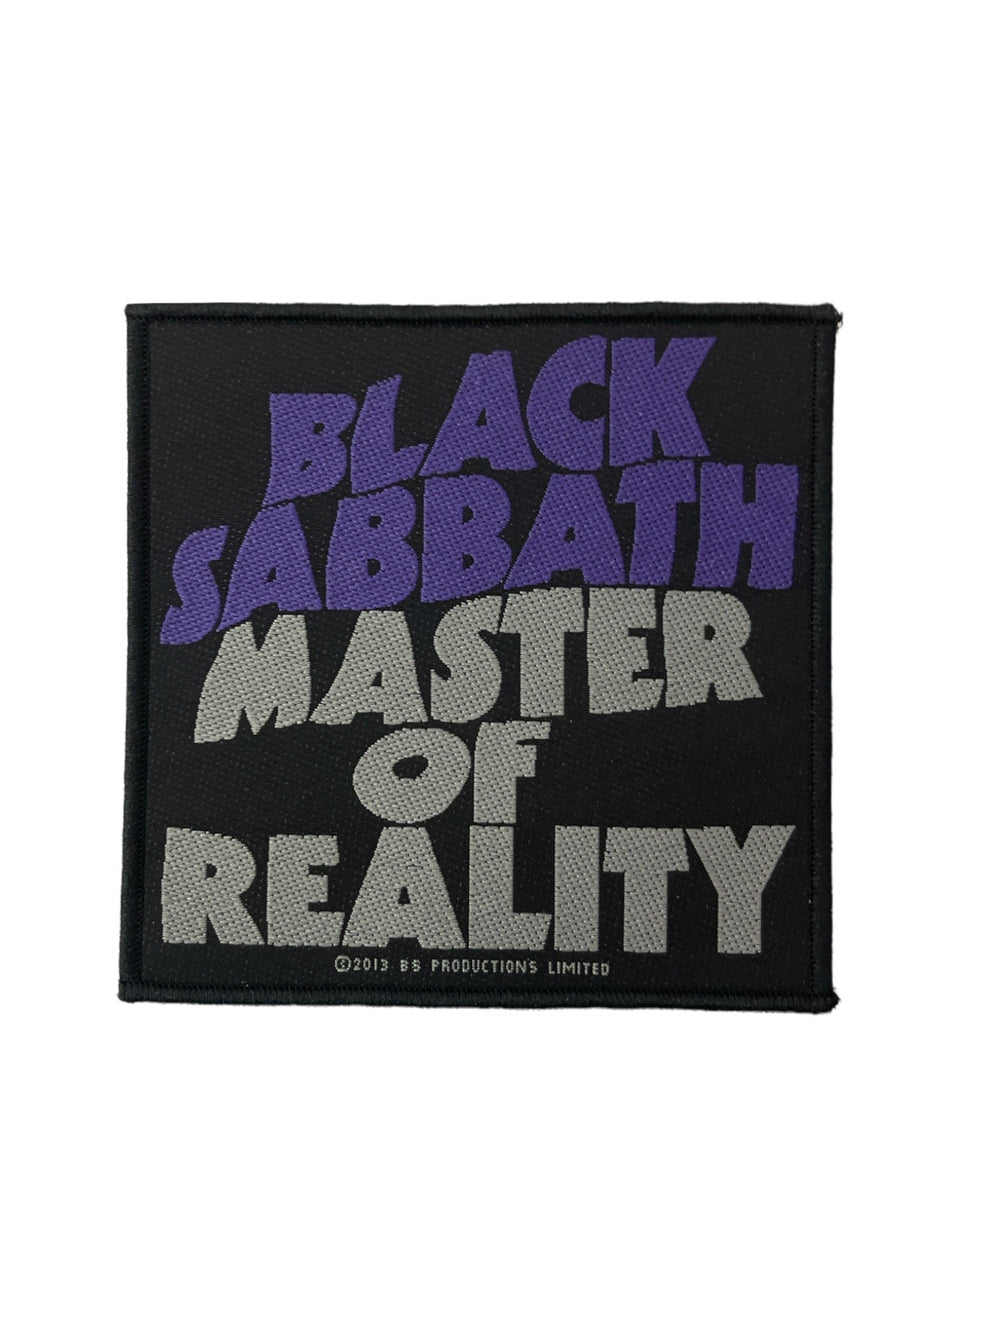 Black Sabbath Master Of Reality Official Sew On Woven Patch Brand New